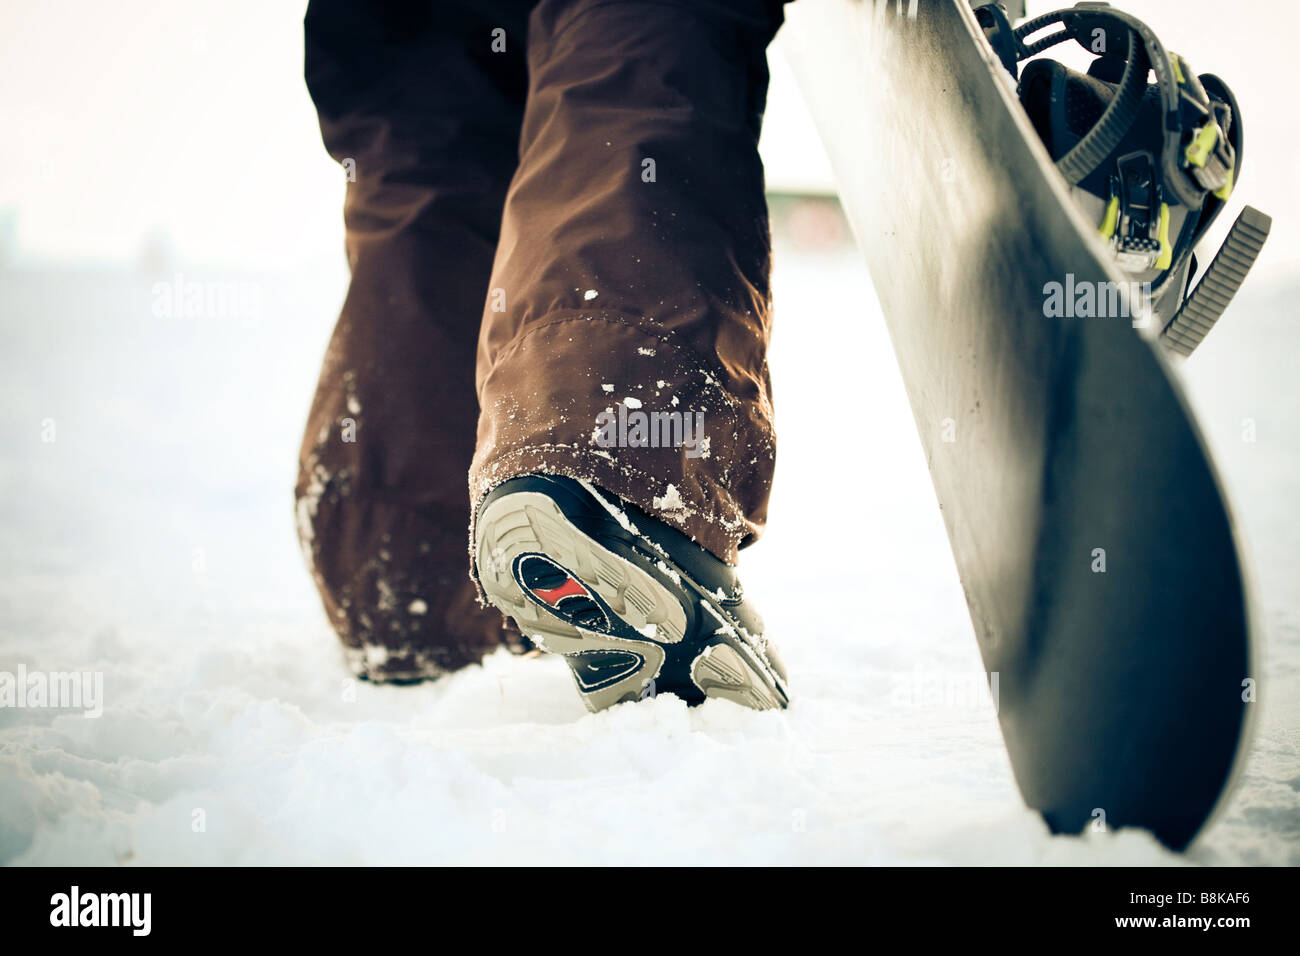 Snowboarder. cross-processing effect Stock Photo